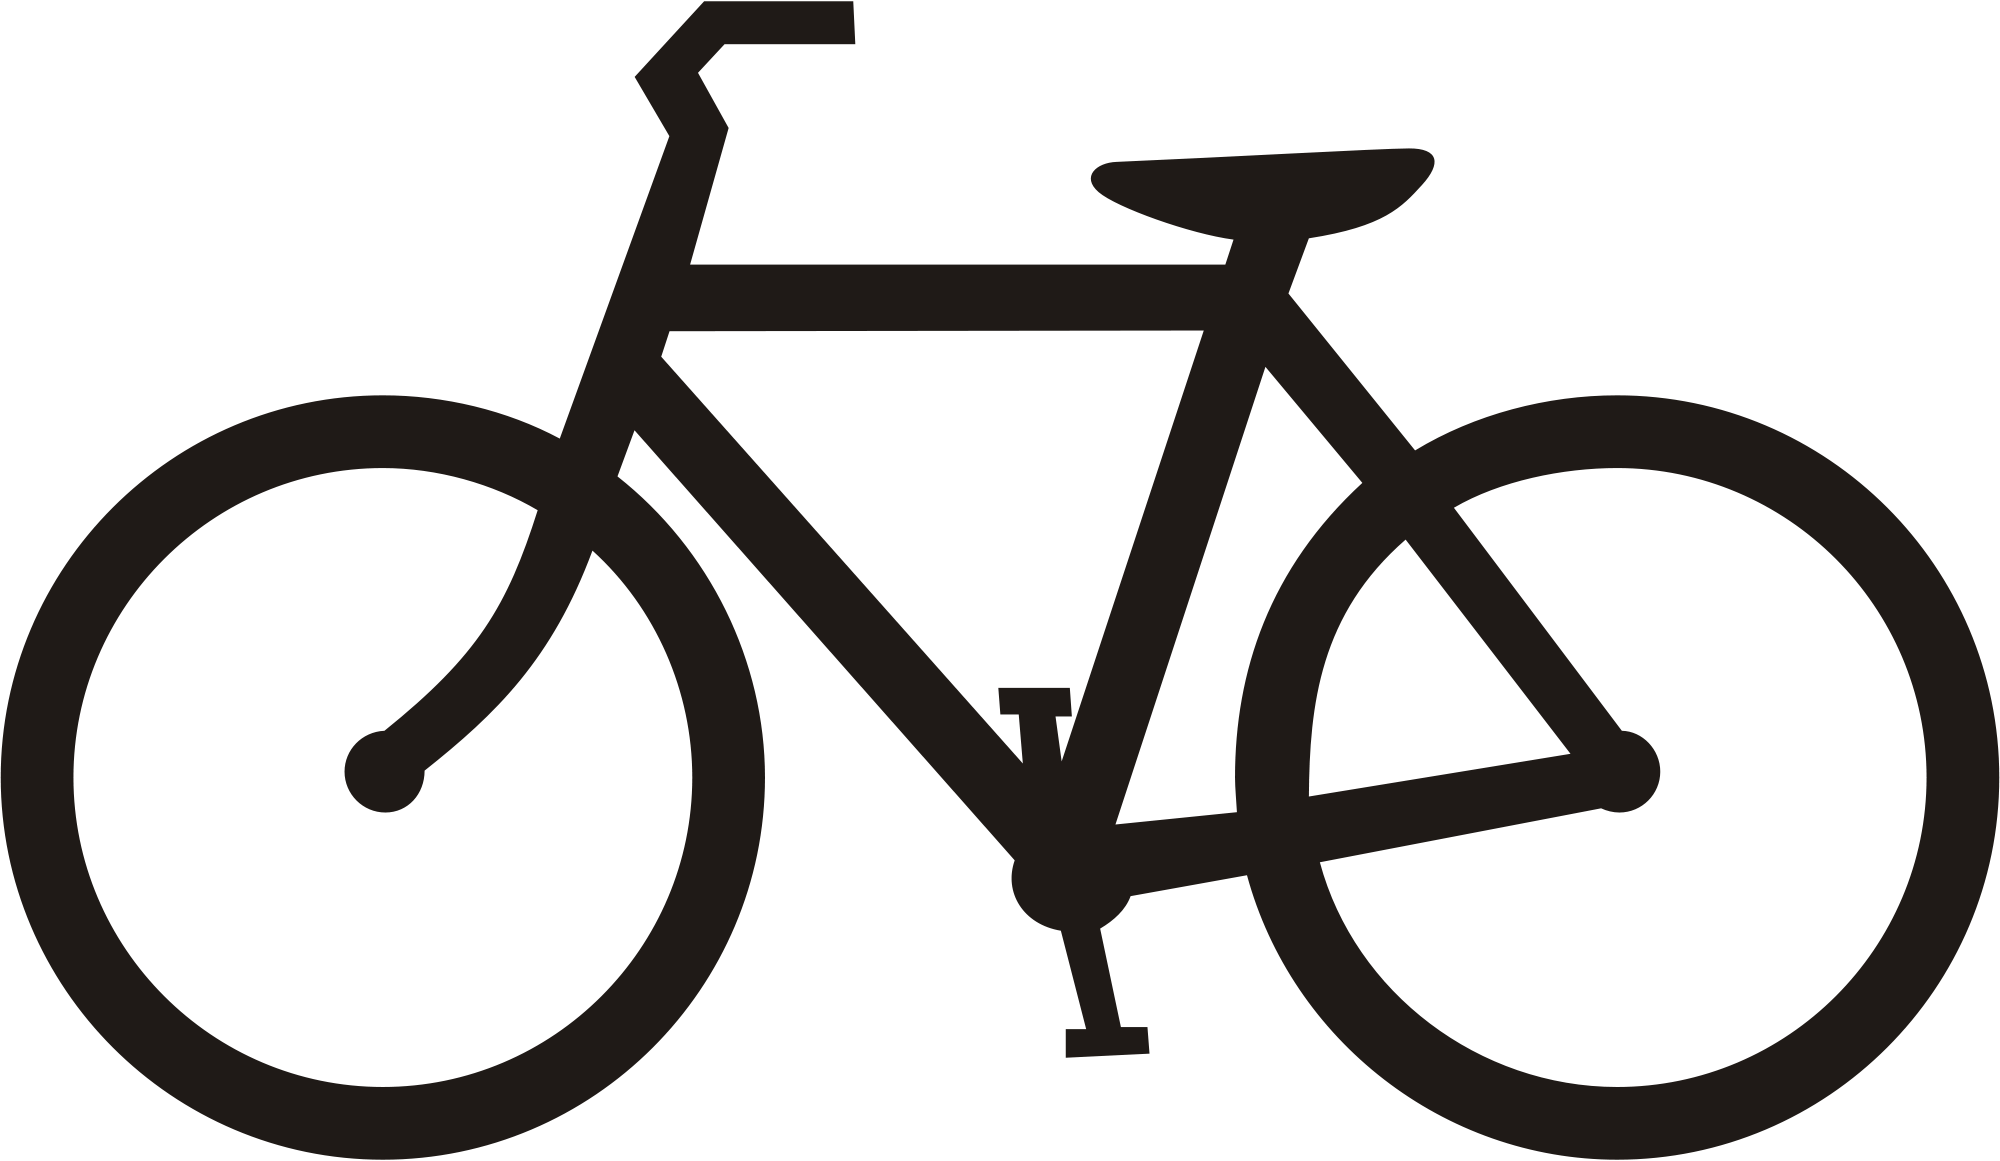 Bicycle signs incep imagine. Mice clipart bike